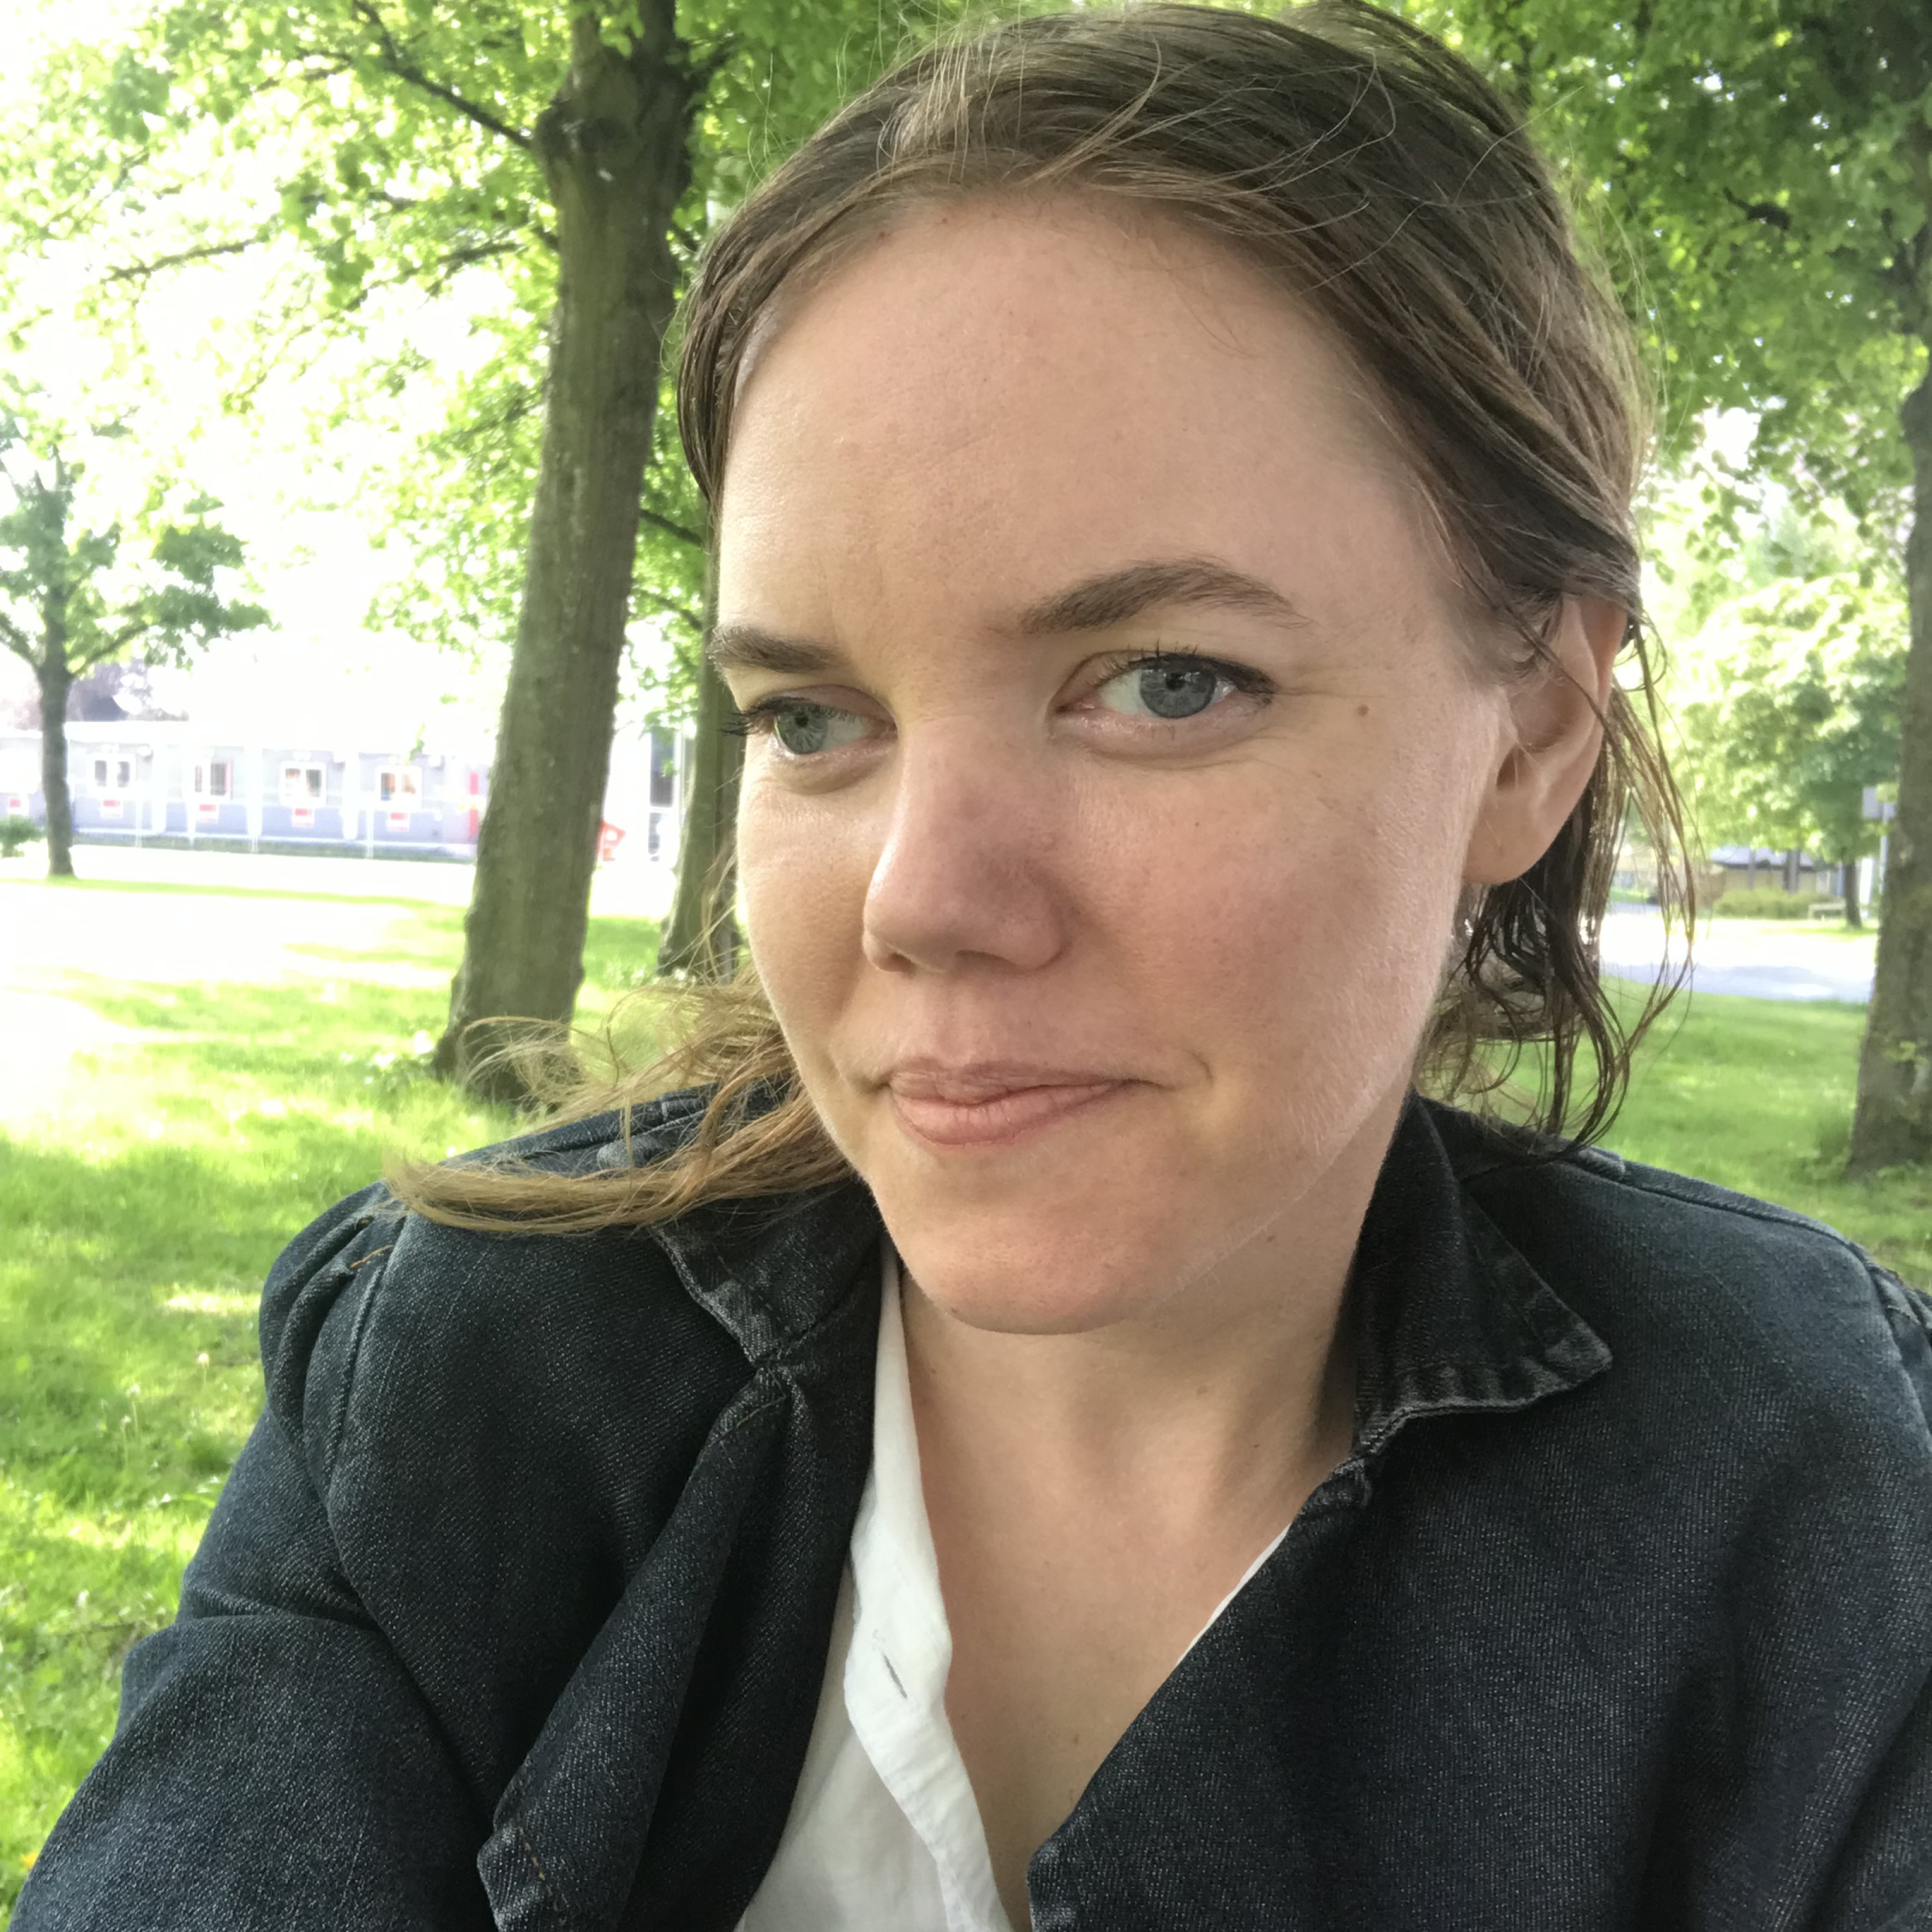 The picture shows dancer Ylva Andersson. Ylva is seen at the front of the picture. She is wearing a black denim jacket and a white shirt. In the background we see a green park where the sun finds its way through the trees.